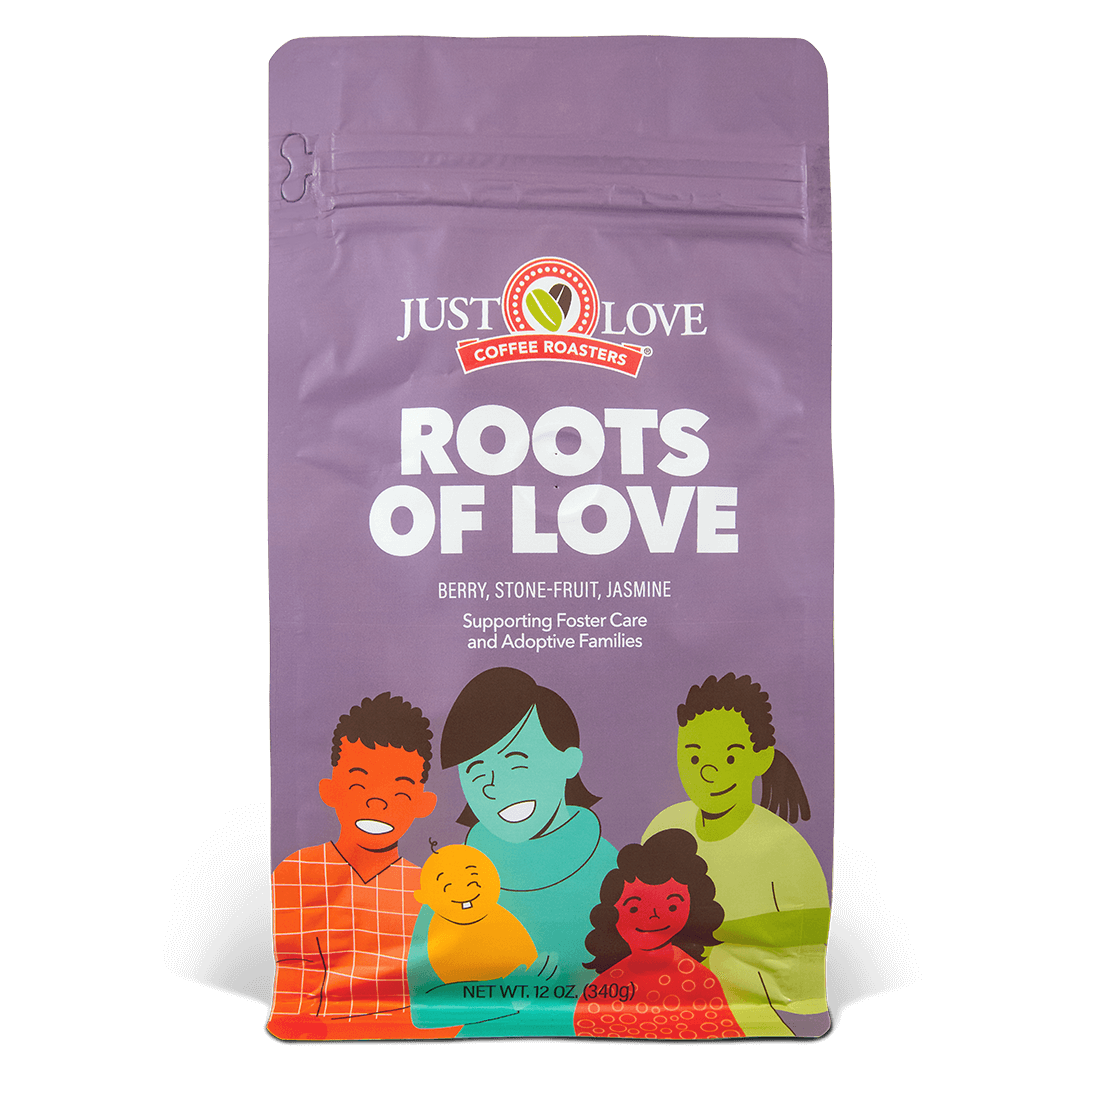 Roots of Love